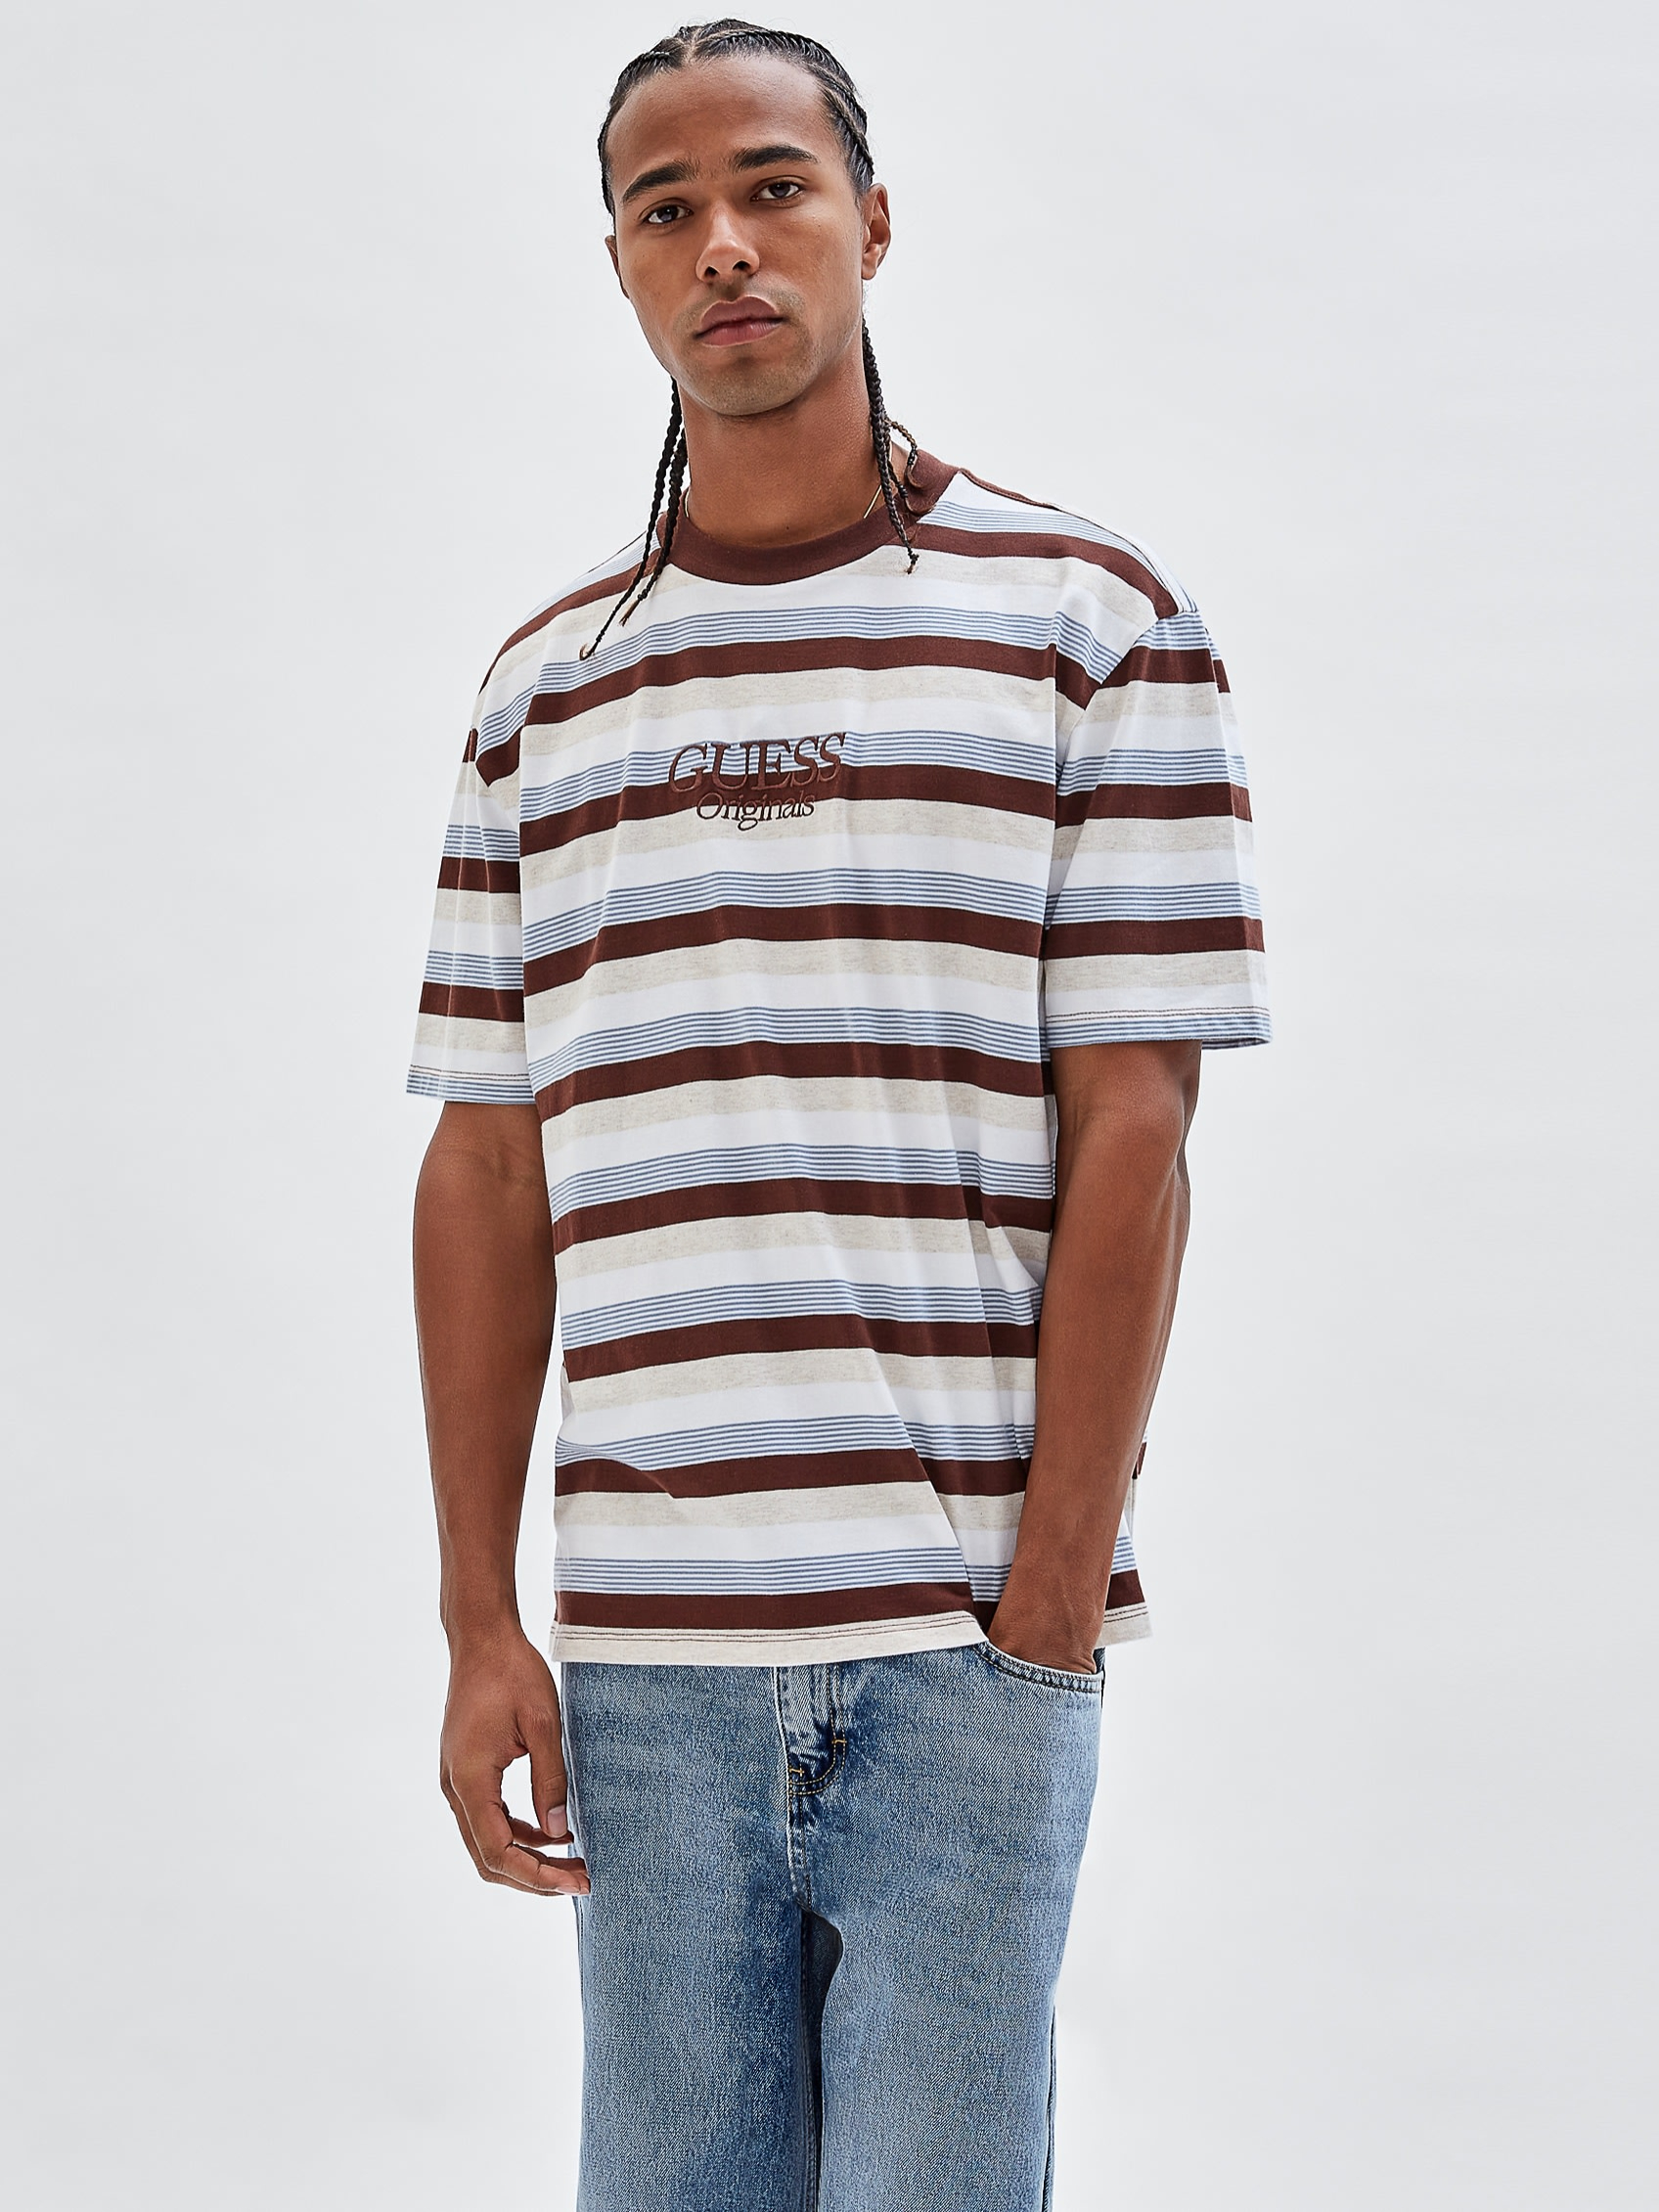 GUESS Originals COLE HEATHER STRIPE TEE | Guess Philippines